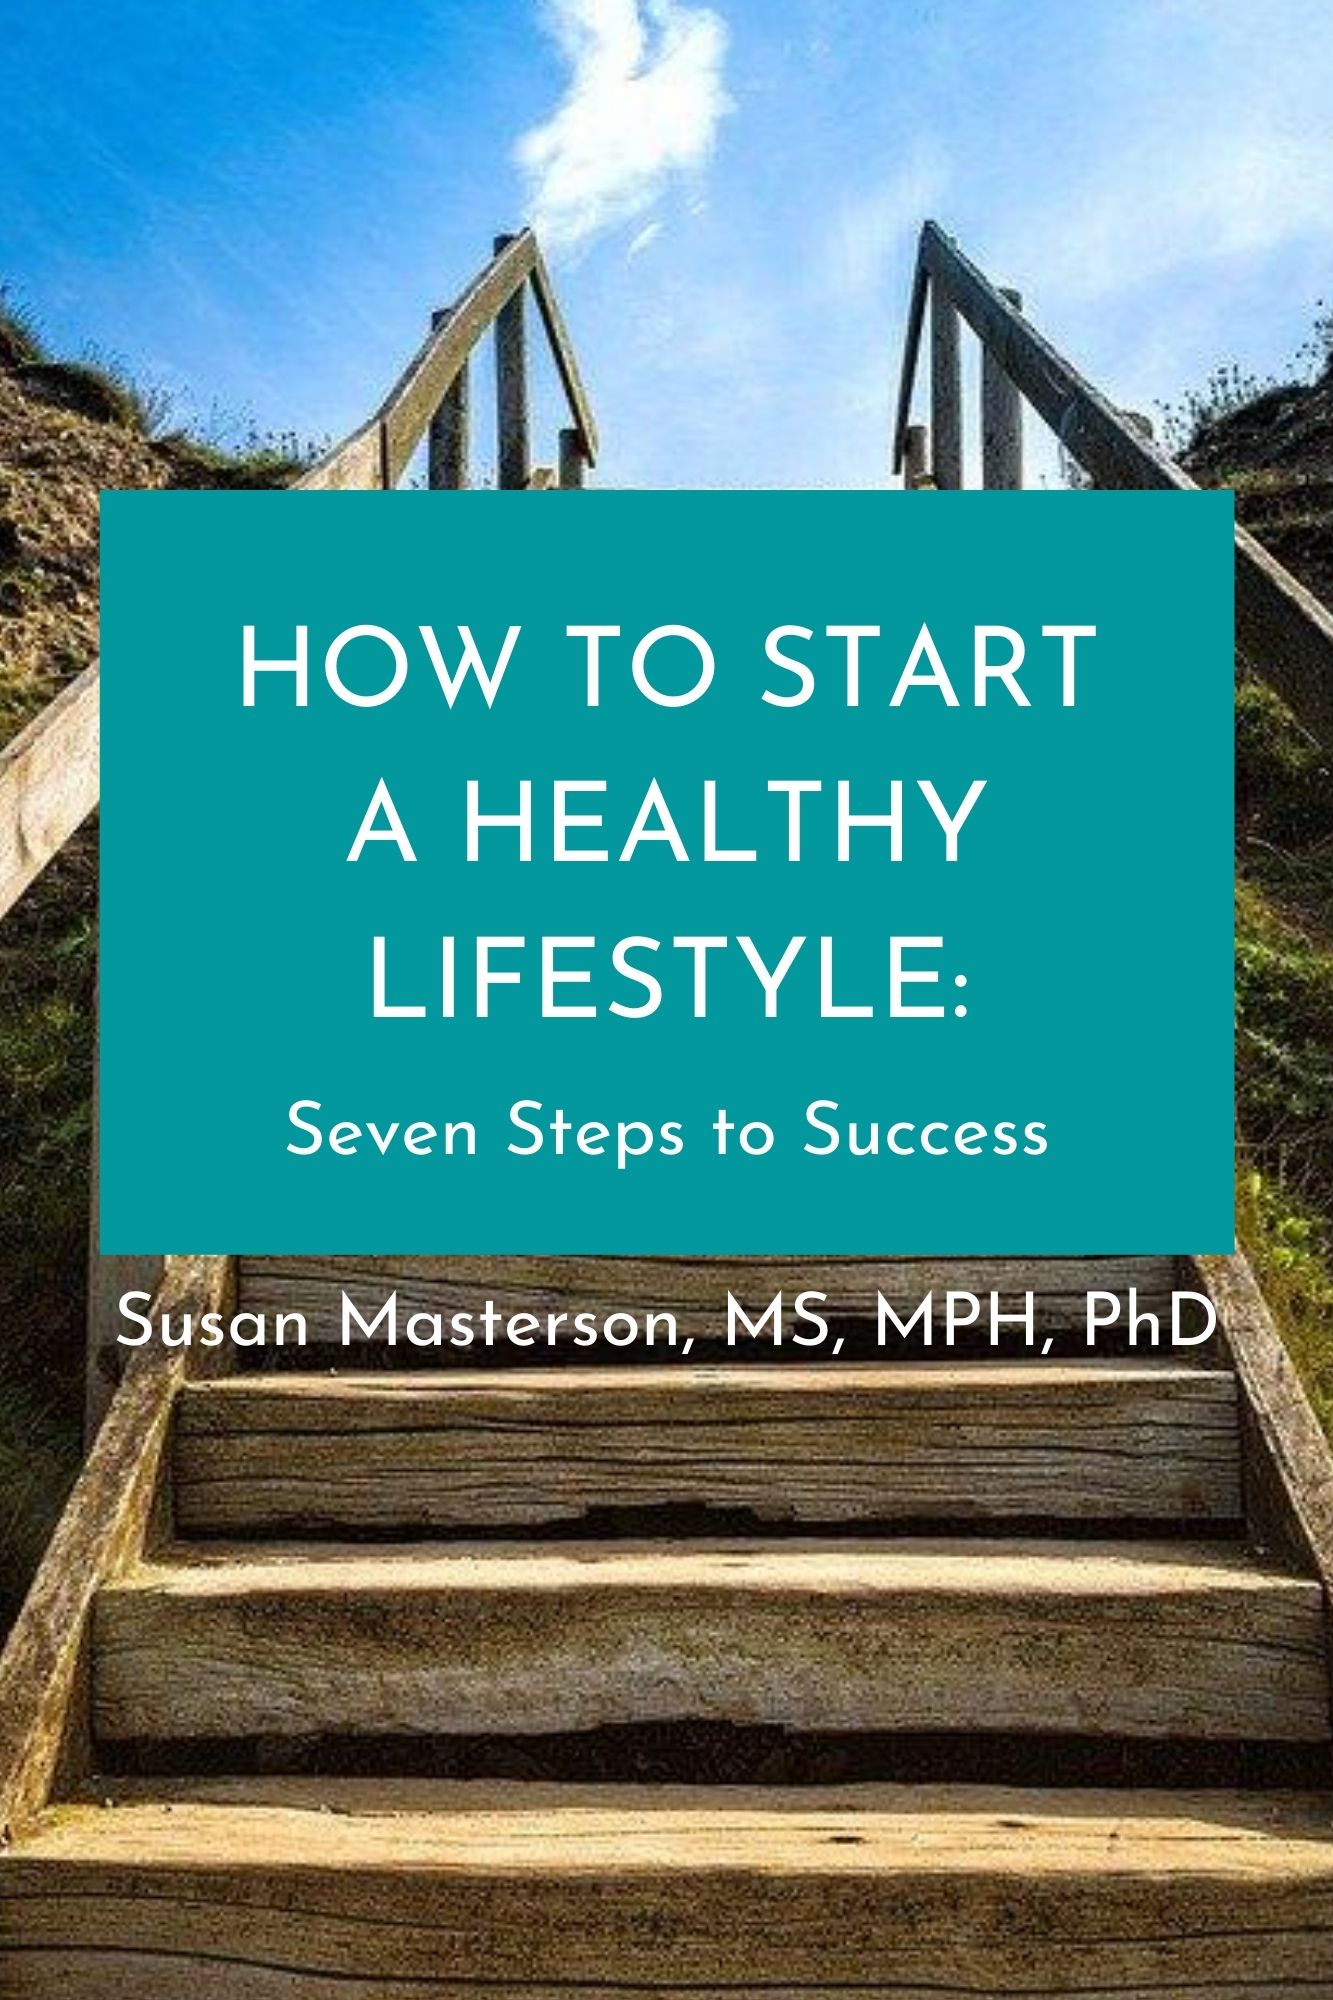 How to Start a Healthy Lifestyle